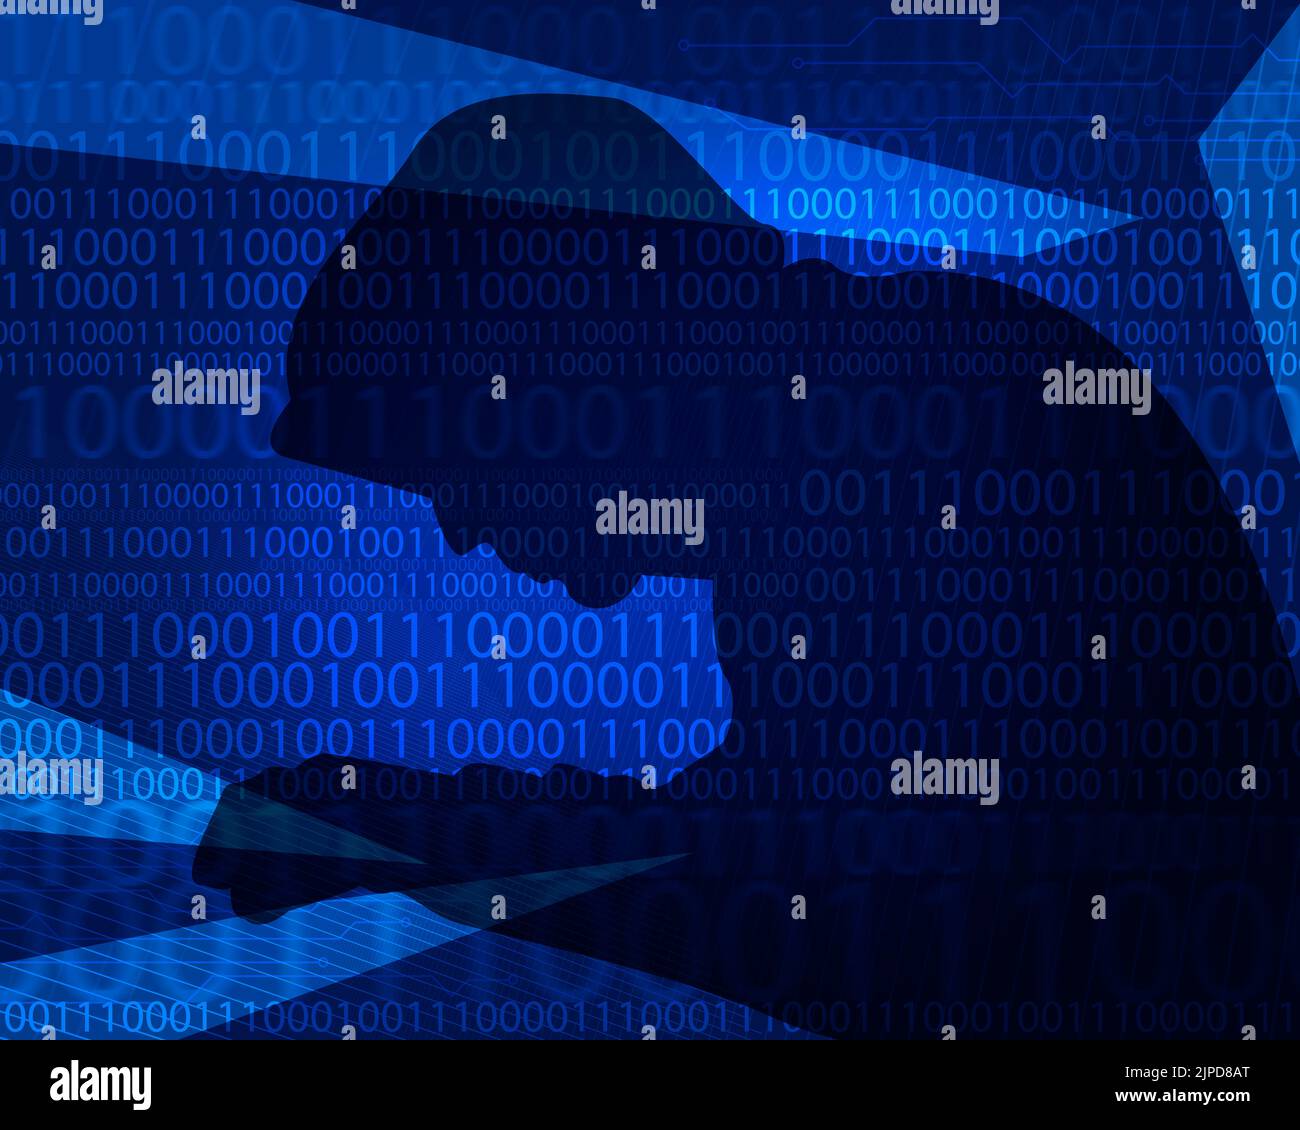 Online Cyber Warfare Hacking Attack Stock Photo